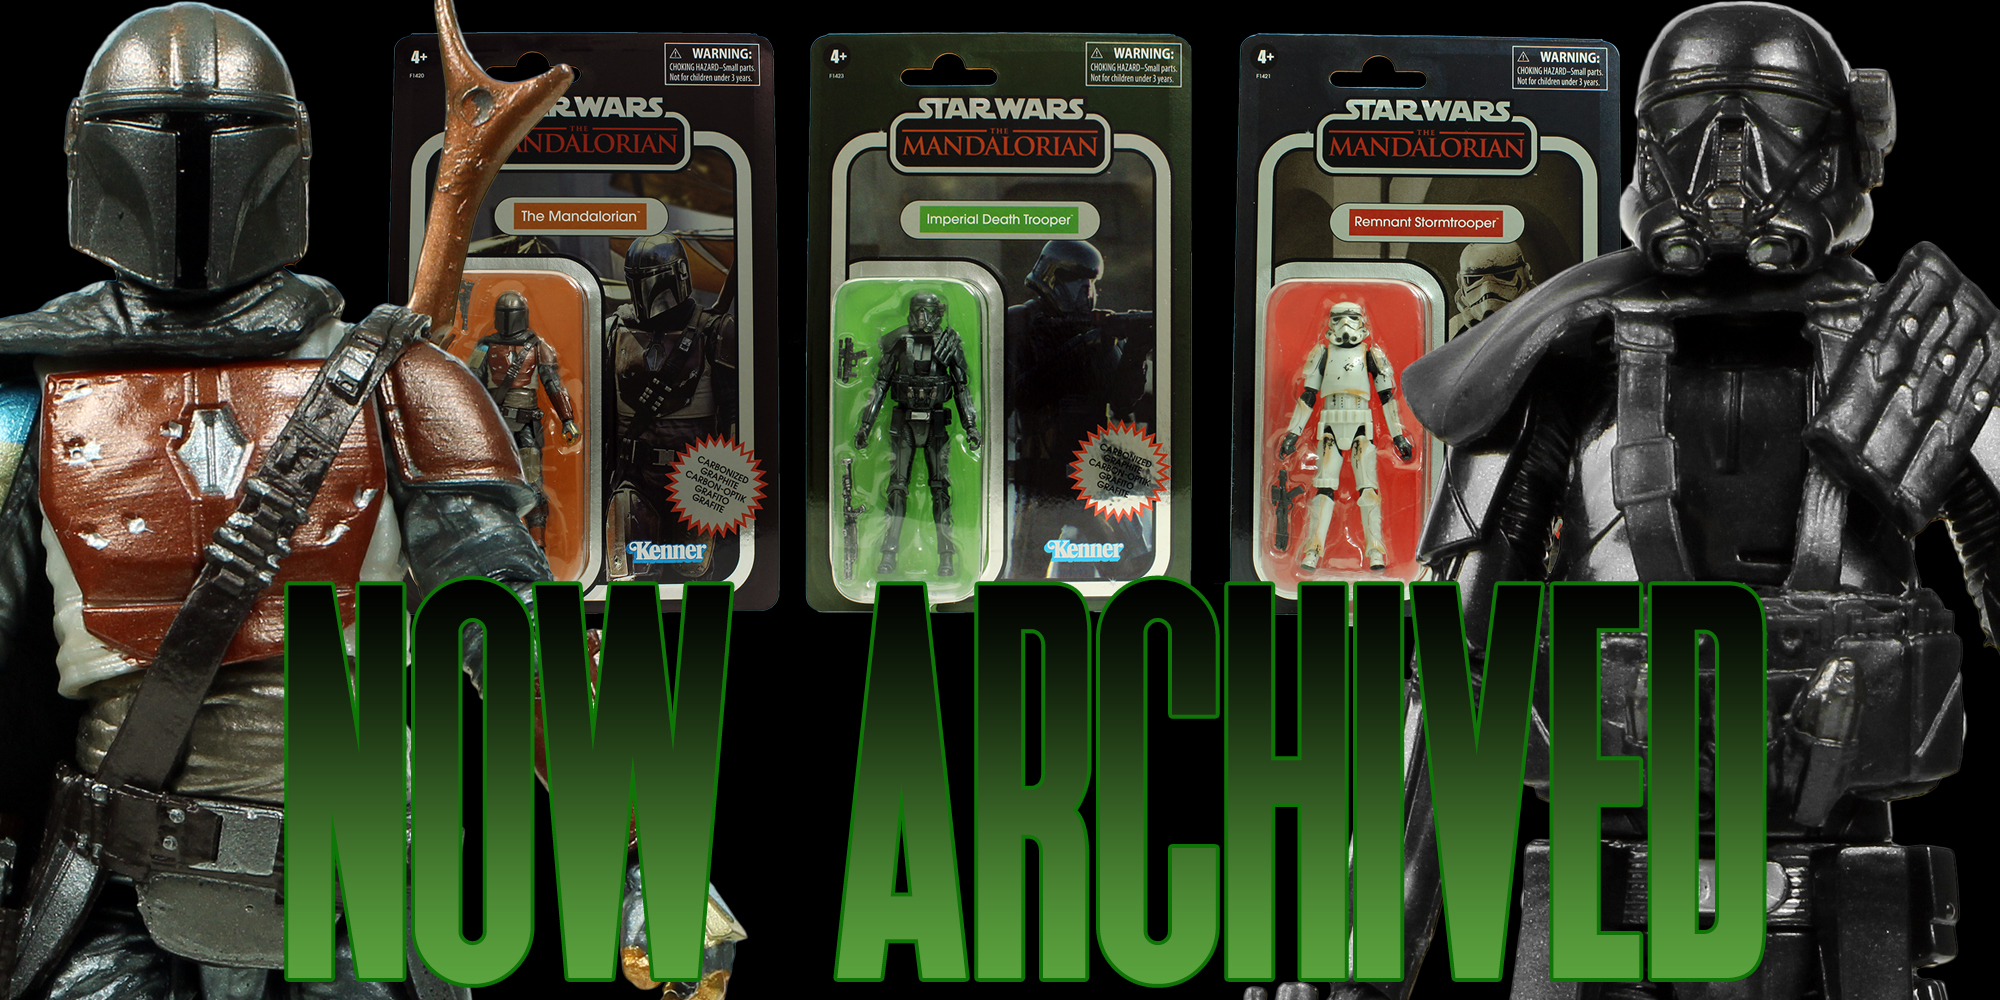 New Vintage Collection Figures Added